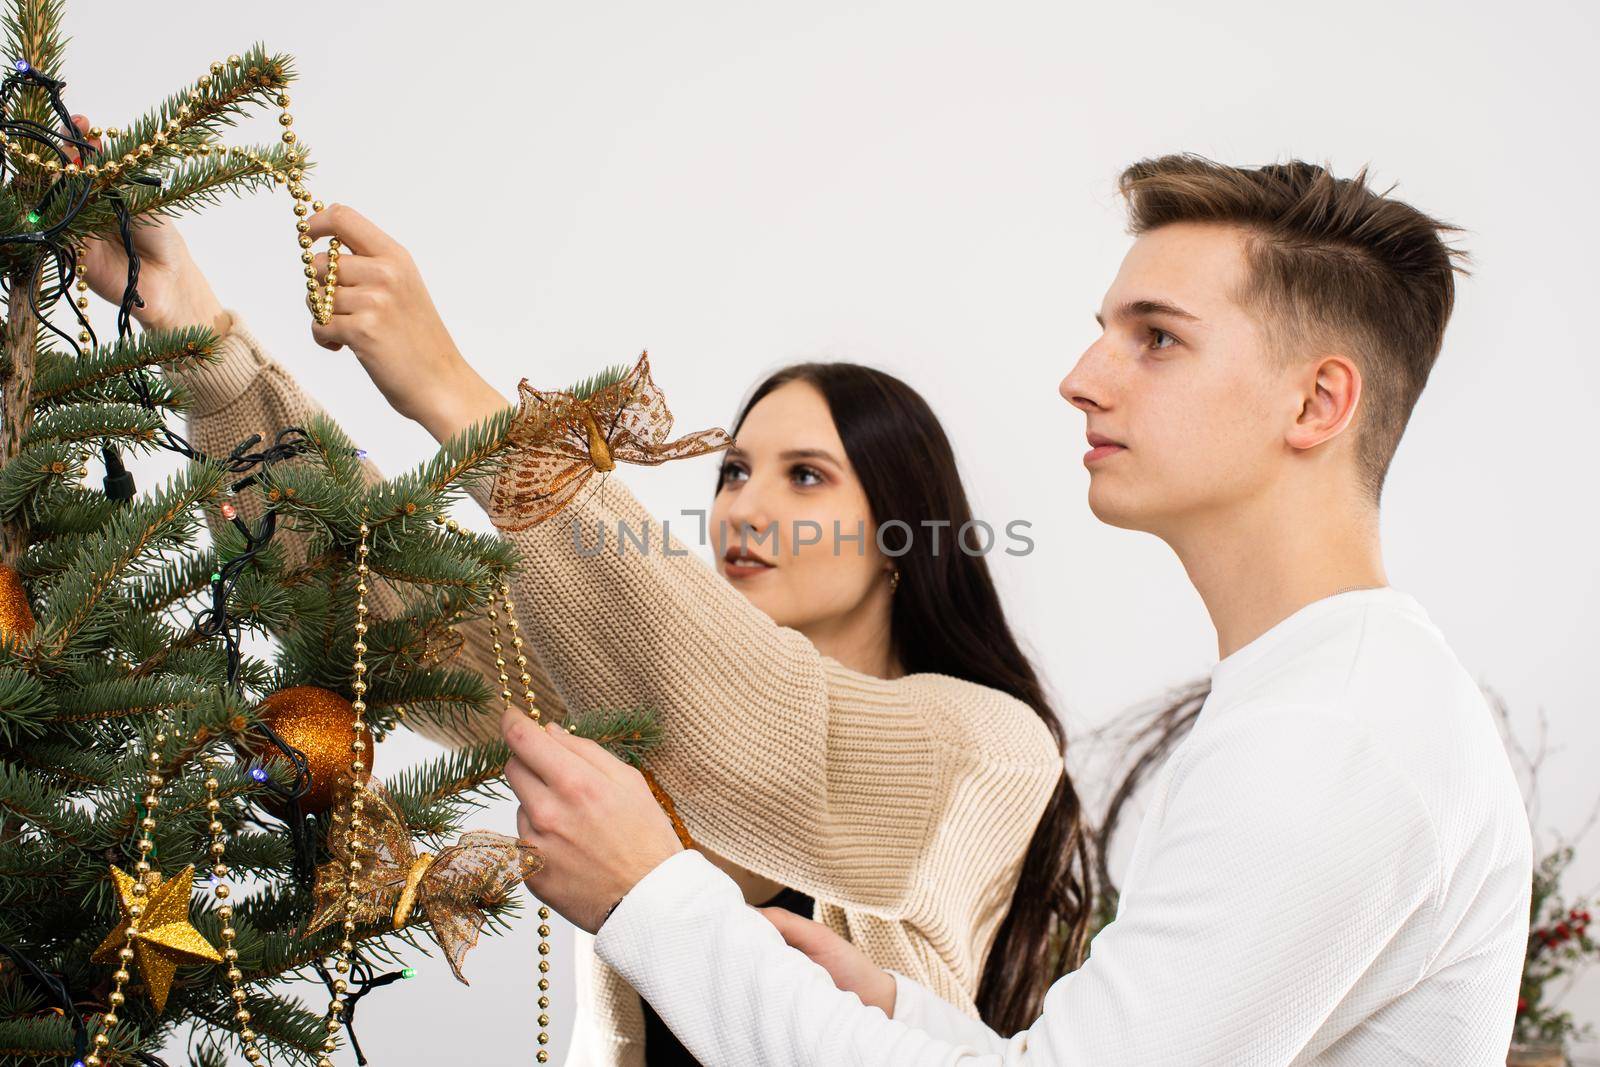 Couple in love while decorating the Christmas tree for Christmas. Smiling young people.